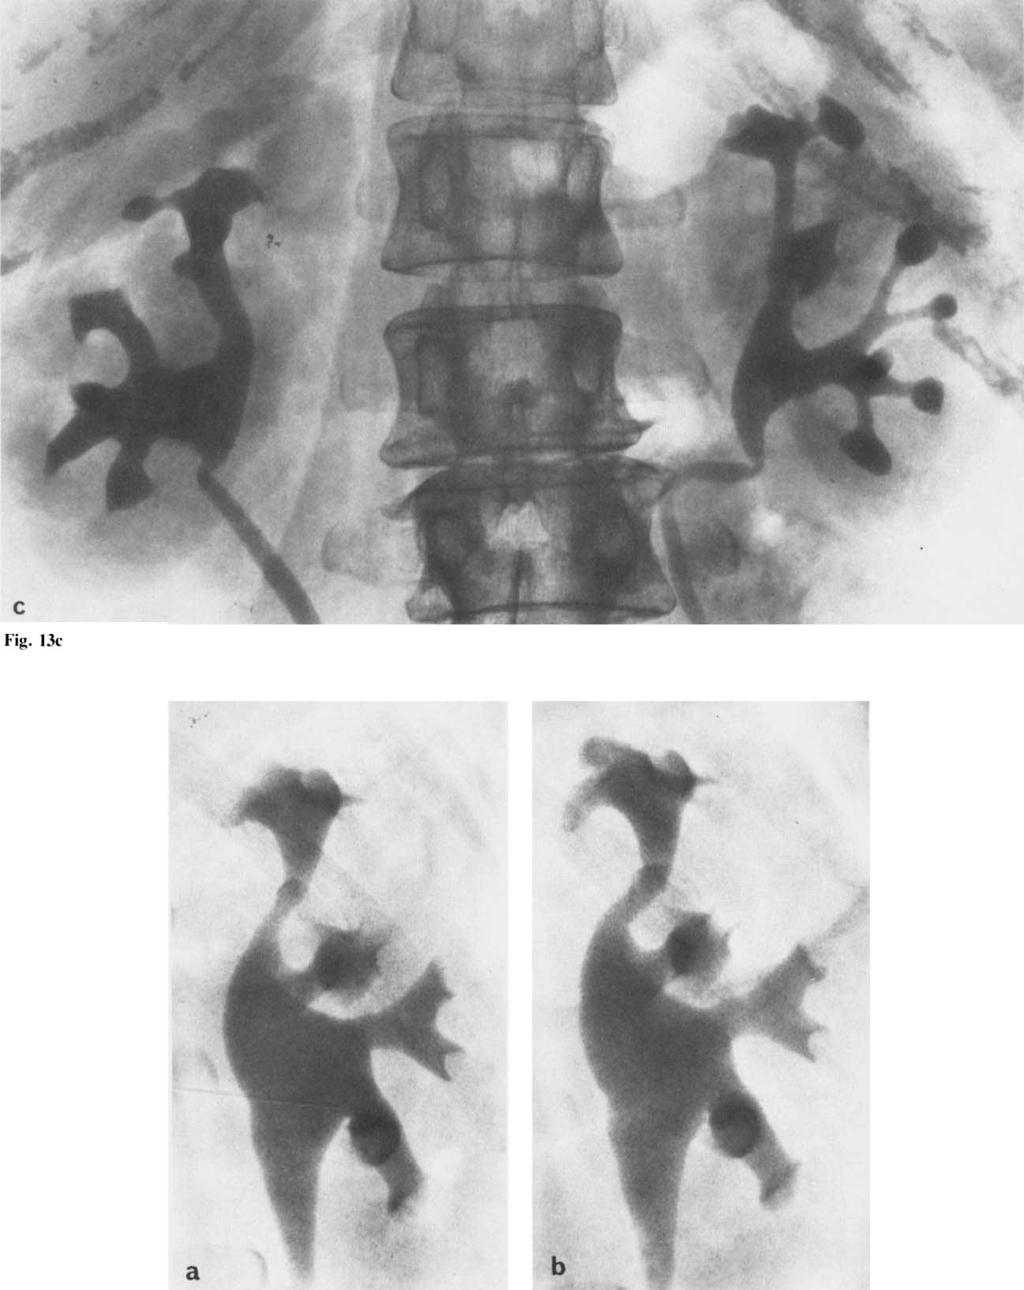 104 Lindvall -4 a b Fig. 14. Urographicfindings in woman with analgesic abuse: a) Norma/findings initially. b) Three years later.